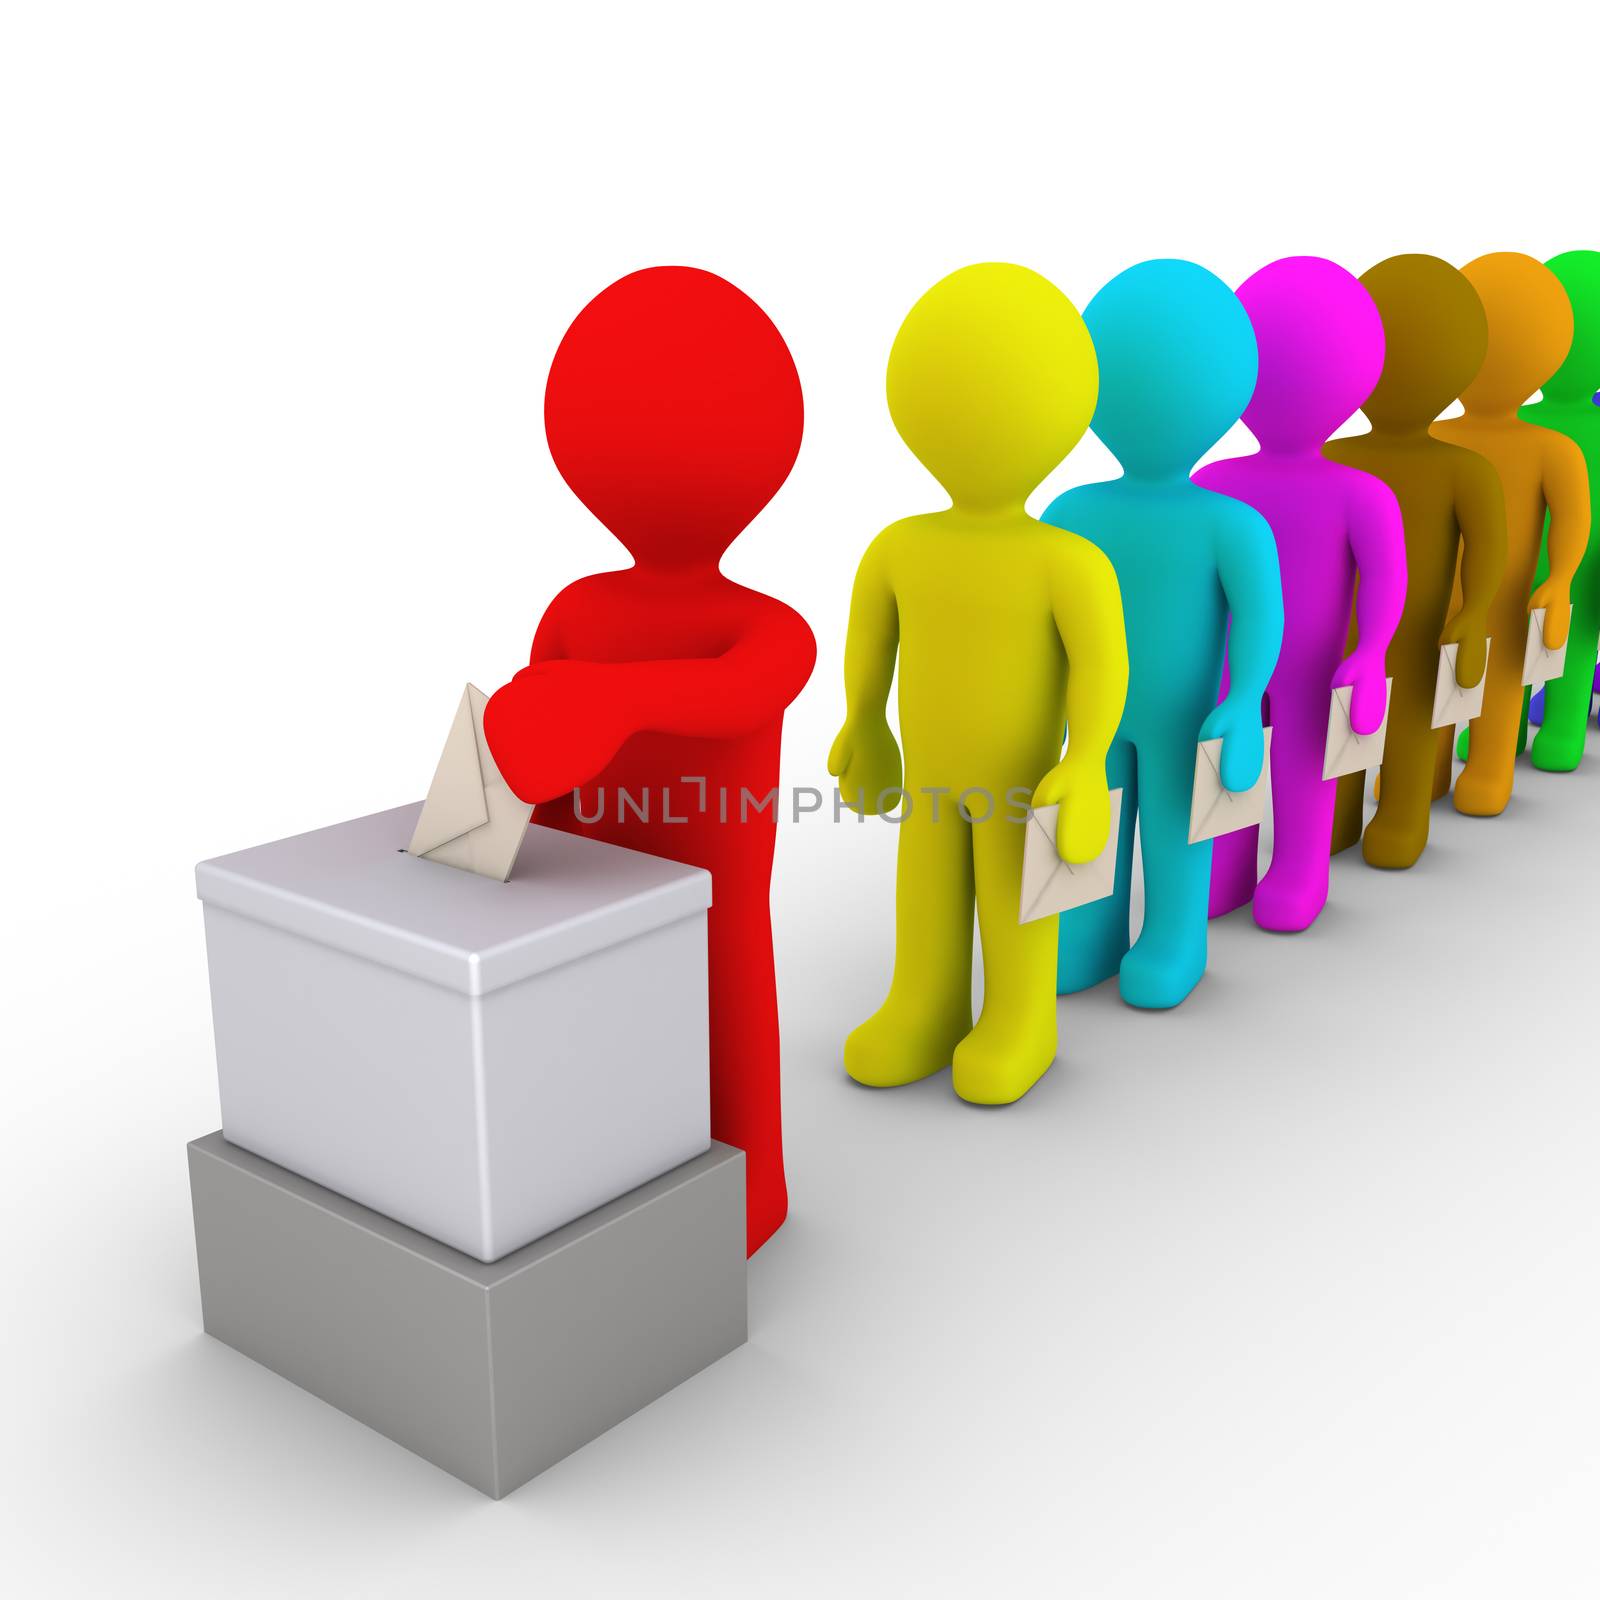 3d people in a row are holding envelopes for a vote